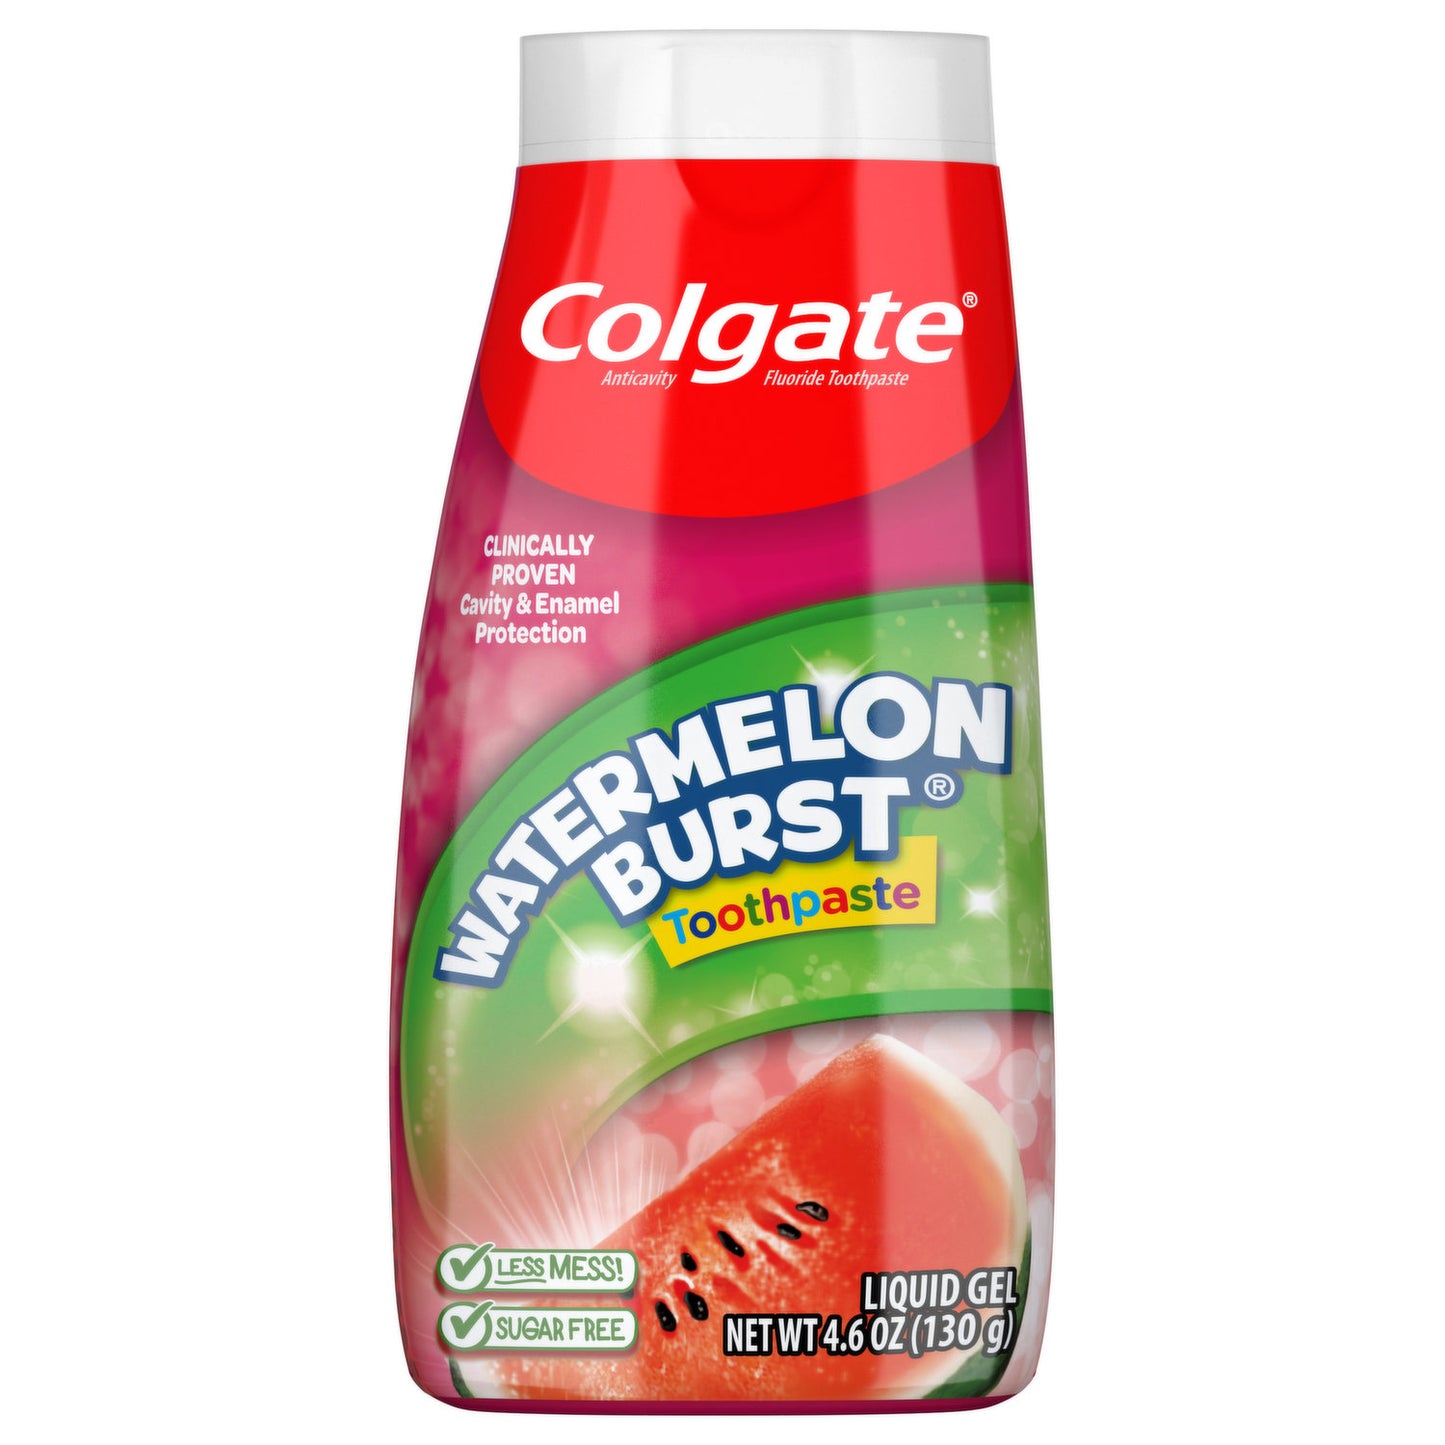 COLGATE KIDS TOOTH PASTE PROVEN CAVITY 2IN1 WATERMELON 130 G